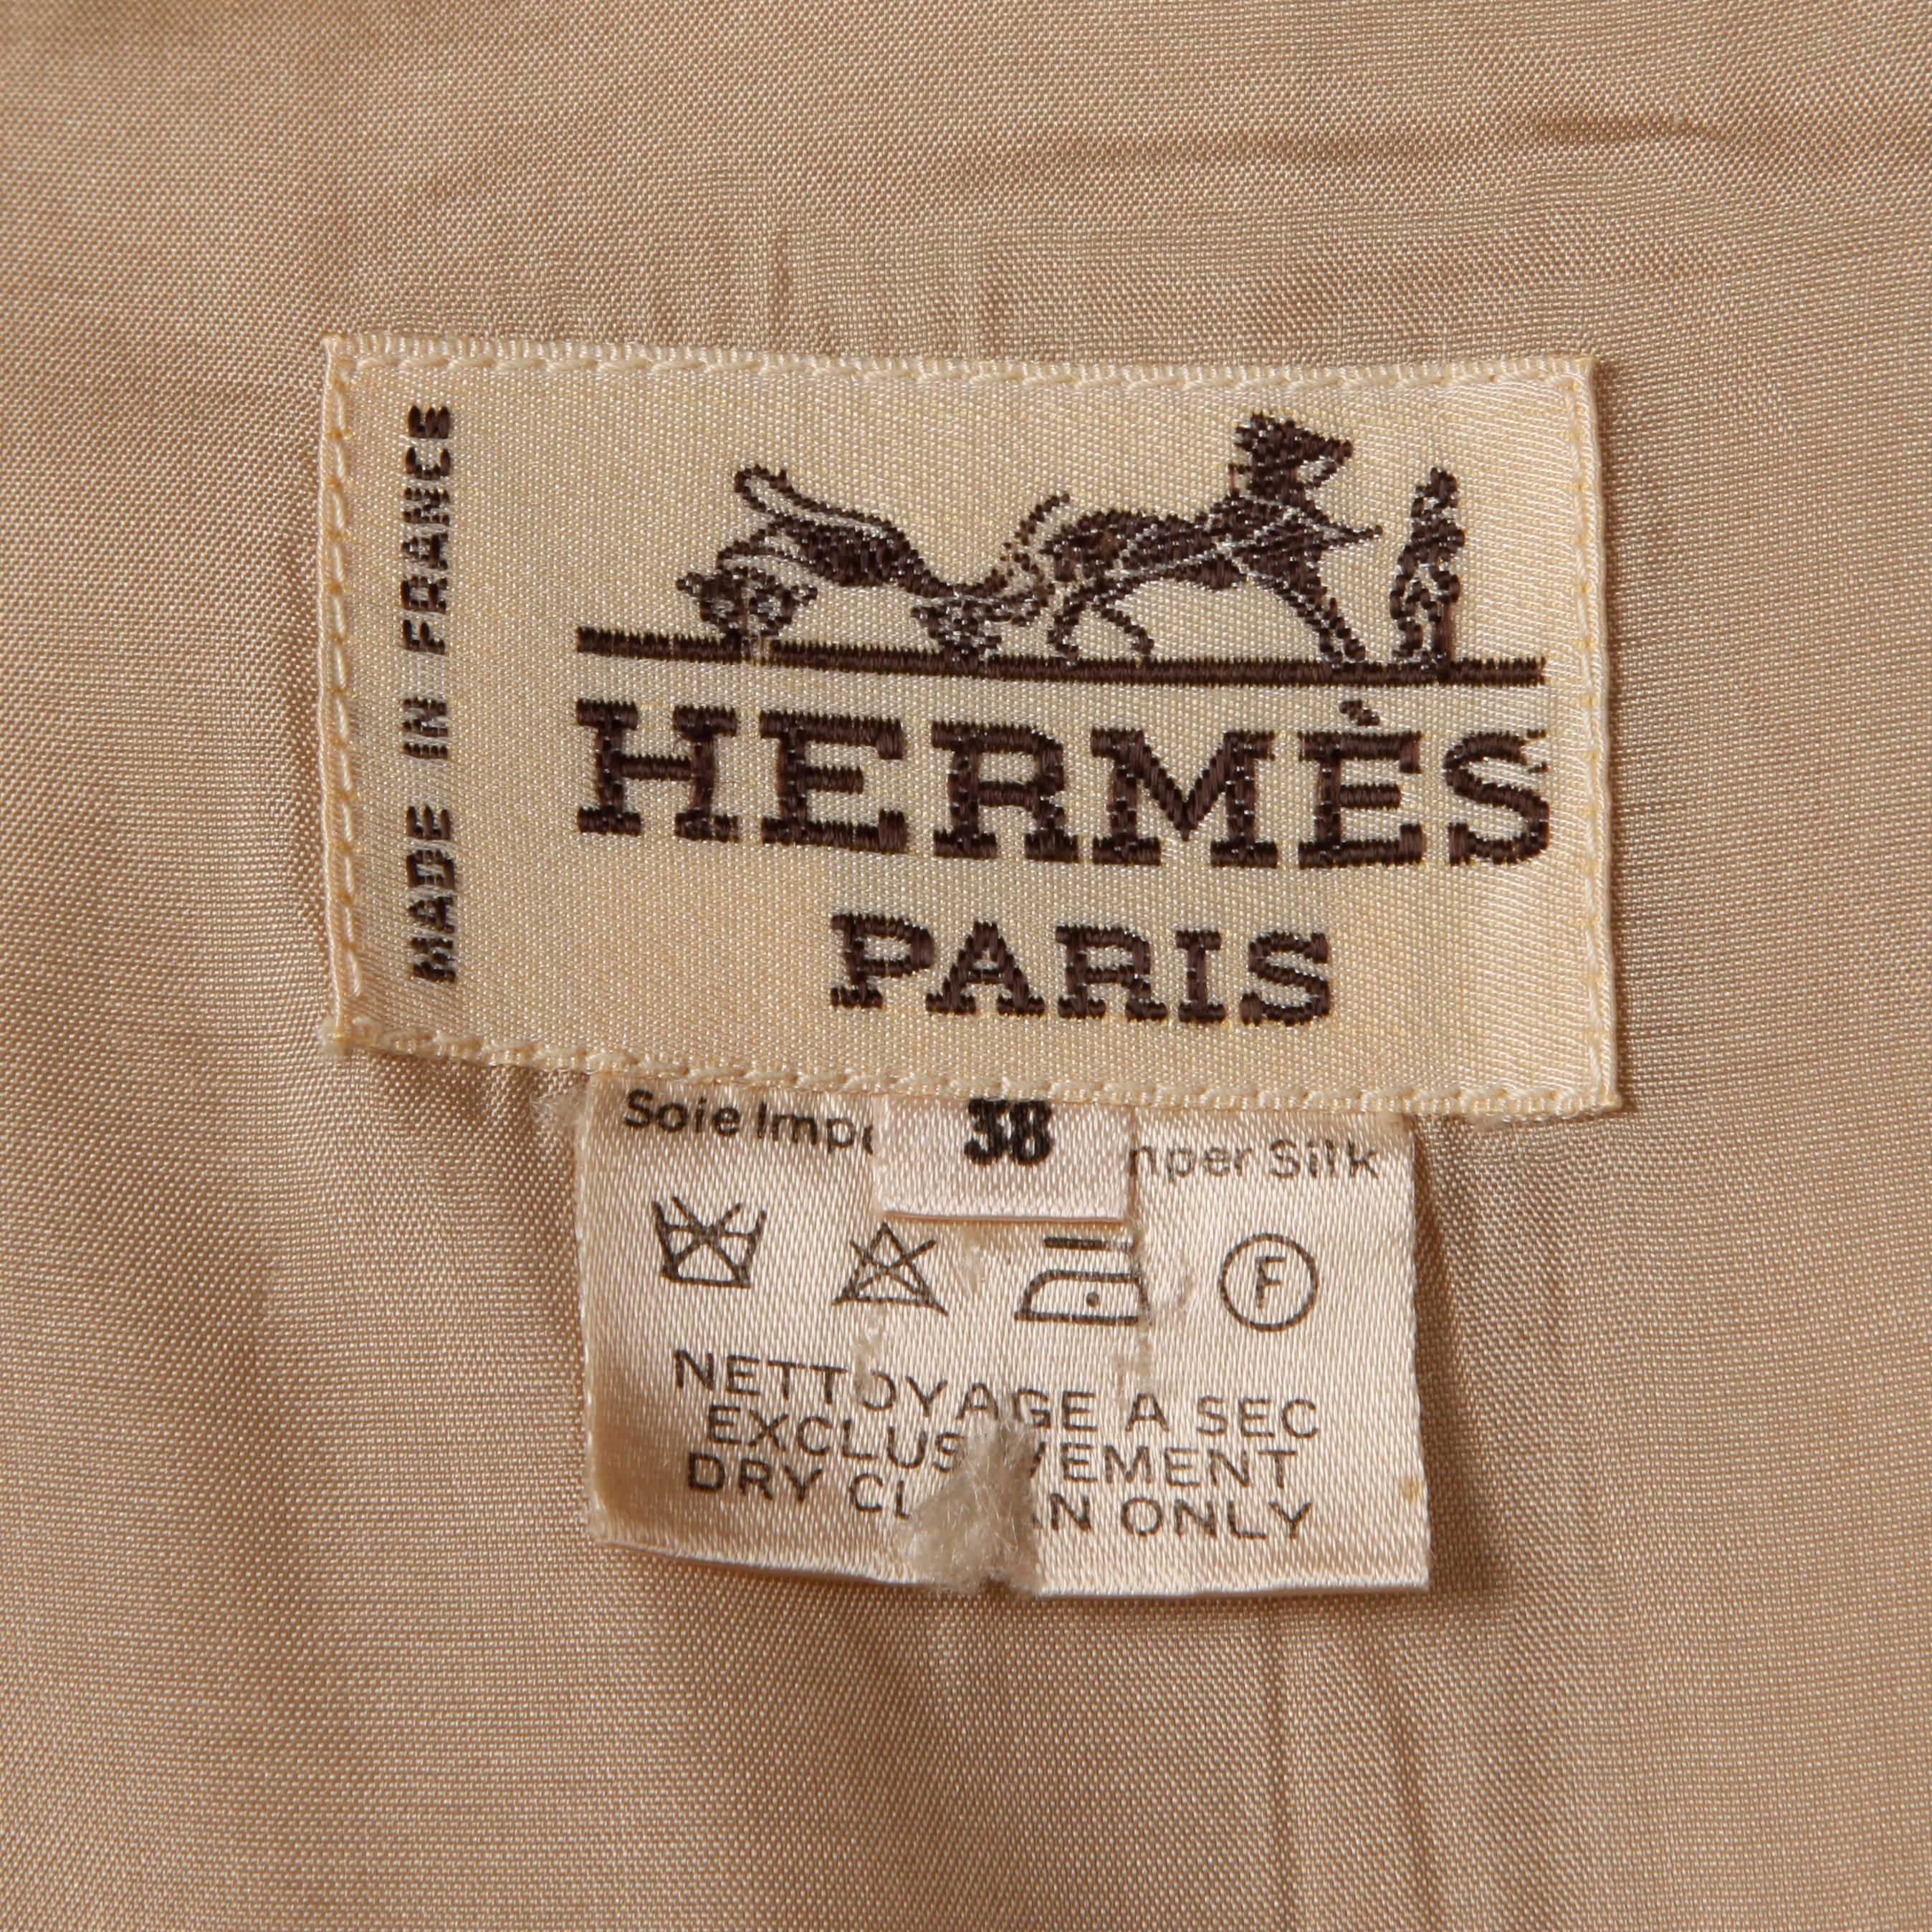 Gorgeous vintage taupe silk trench coat by Hermes. Partially lined in silk with pockets and matching sash belt. The marked size is 38, but the coat will fit modern sizes small-large on account of the oversized fit. The bust measures 40", waist